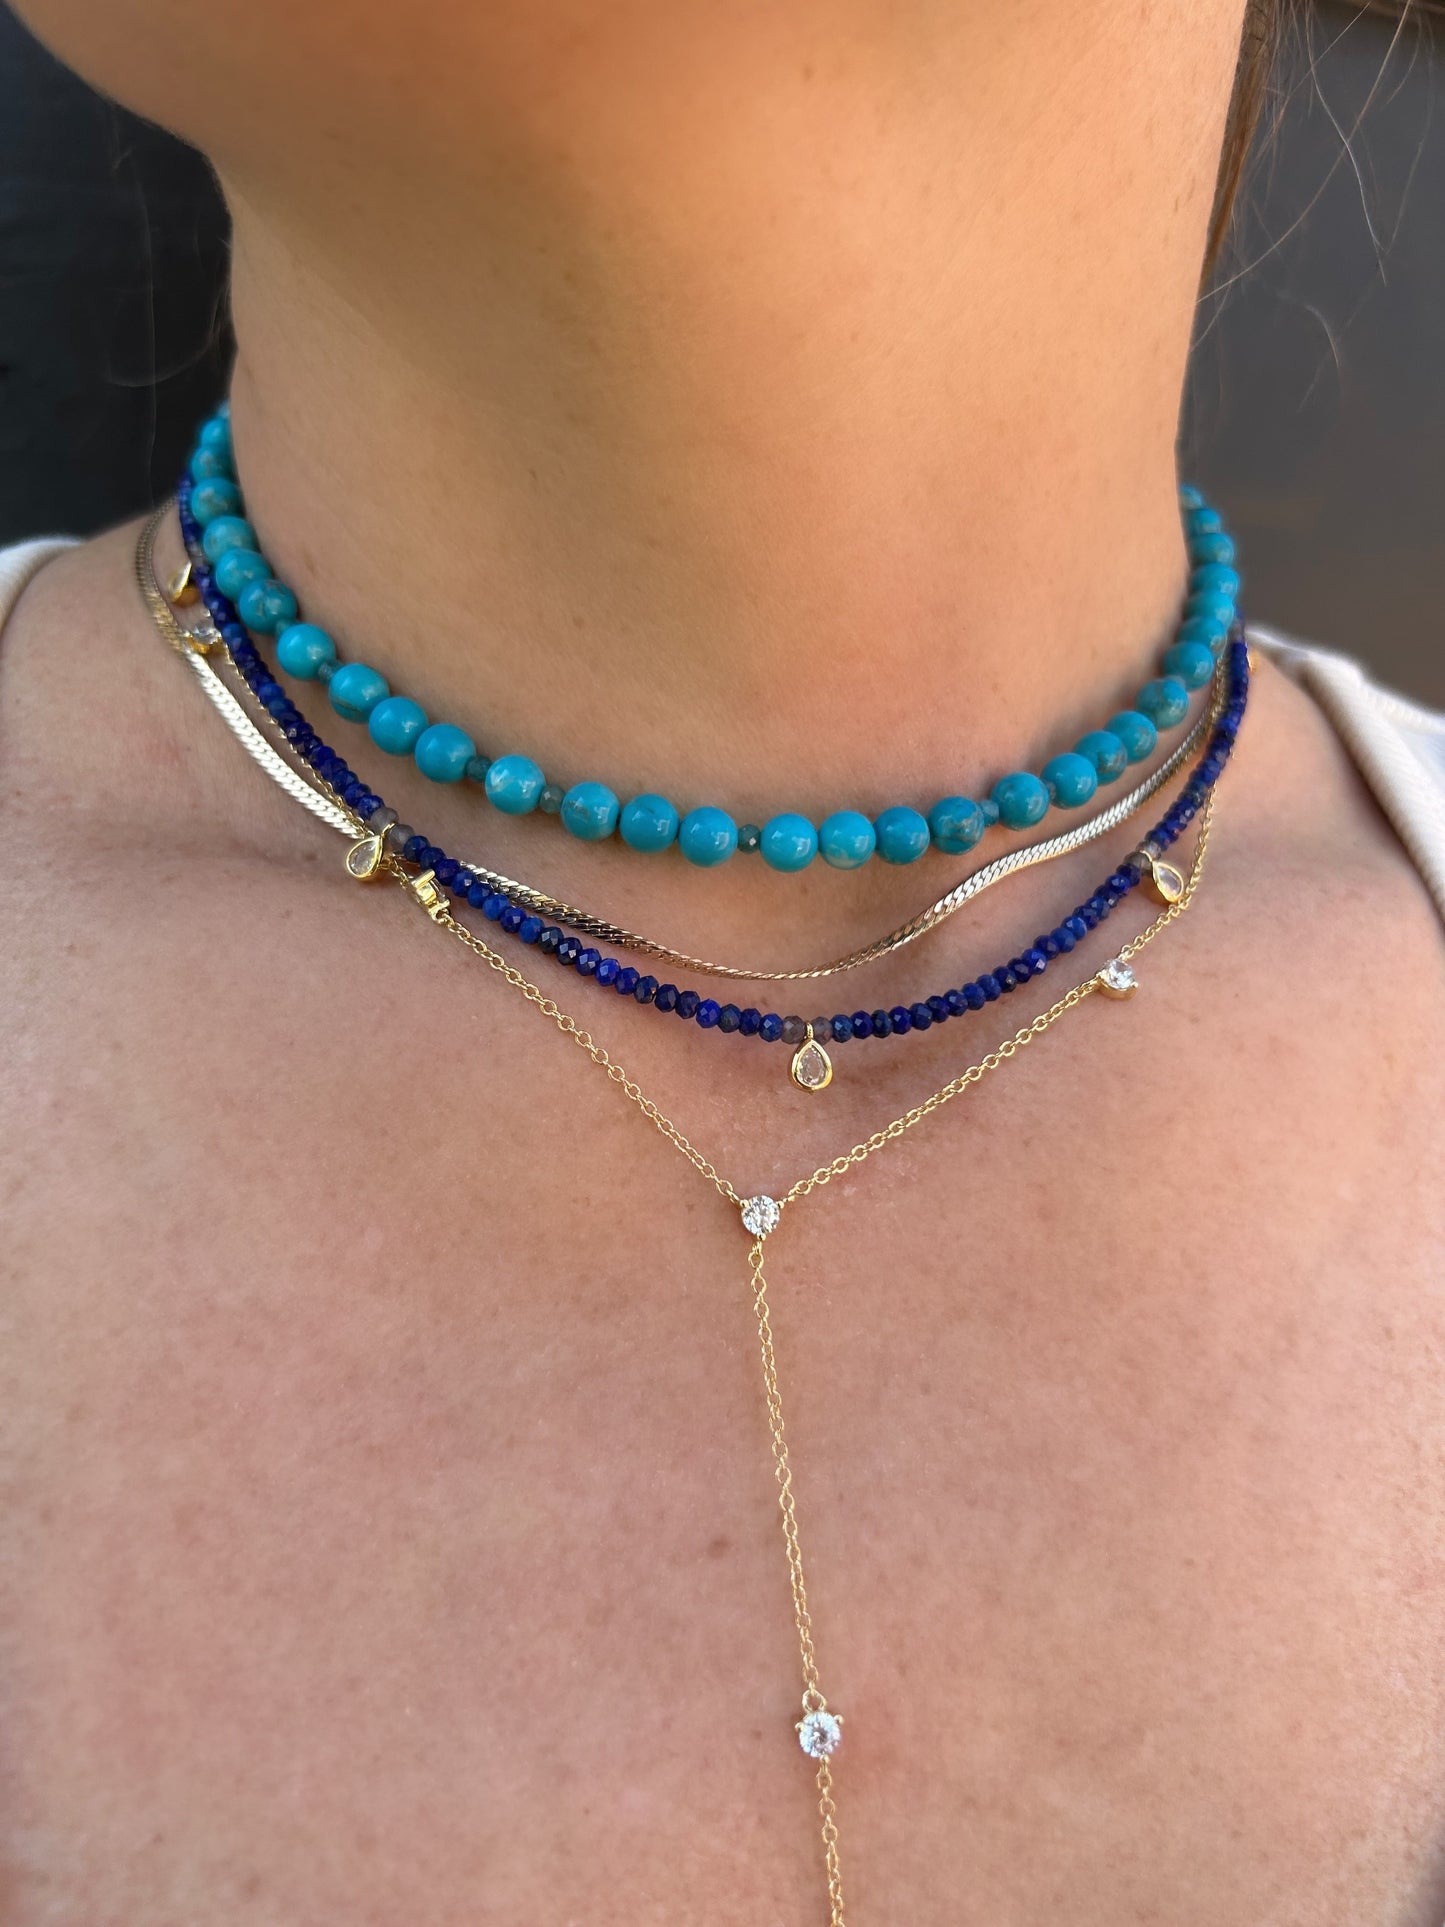 Lapis Lazuli necklace by Eight Five One Jewelry